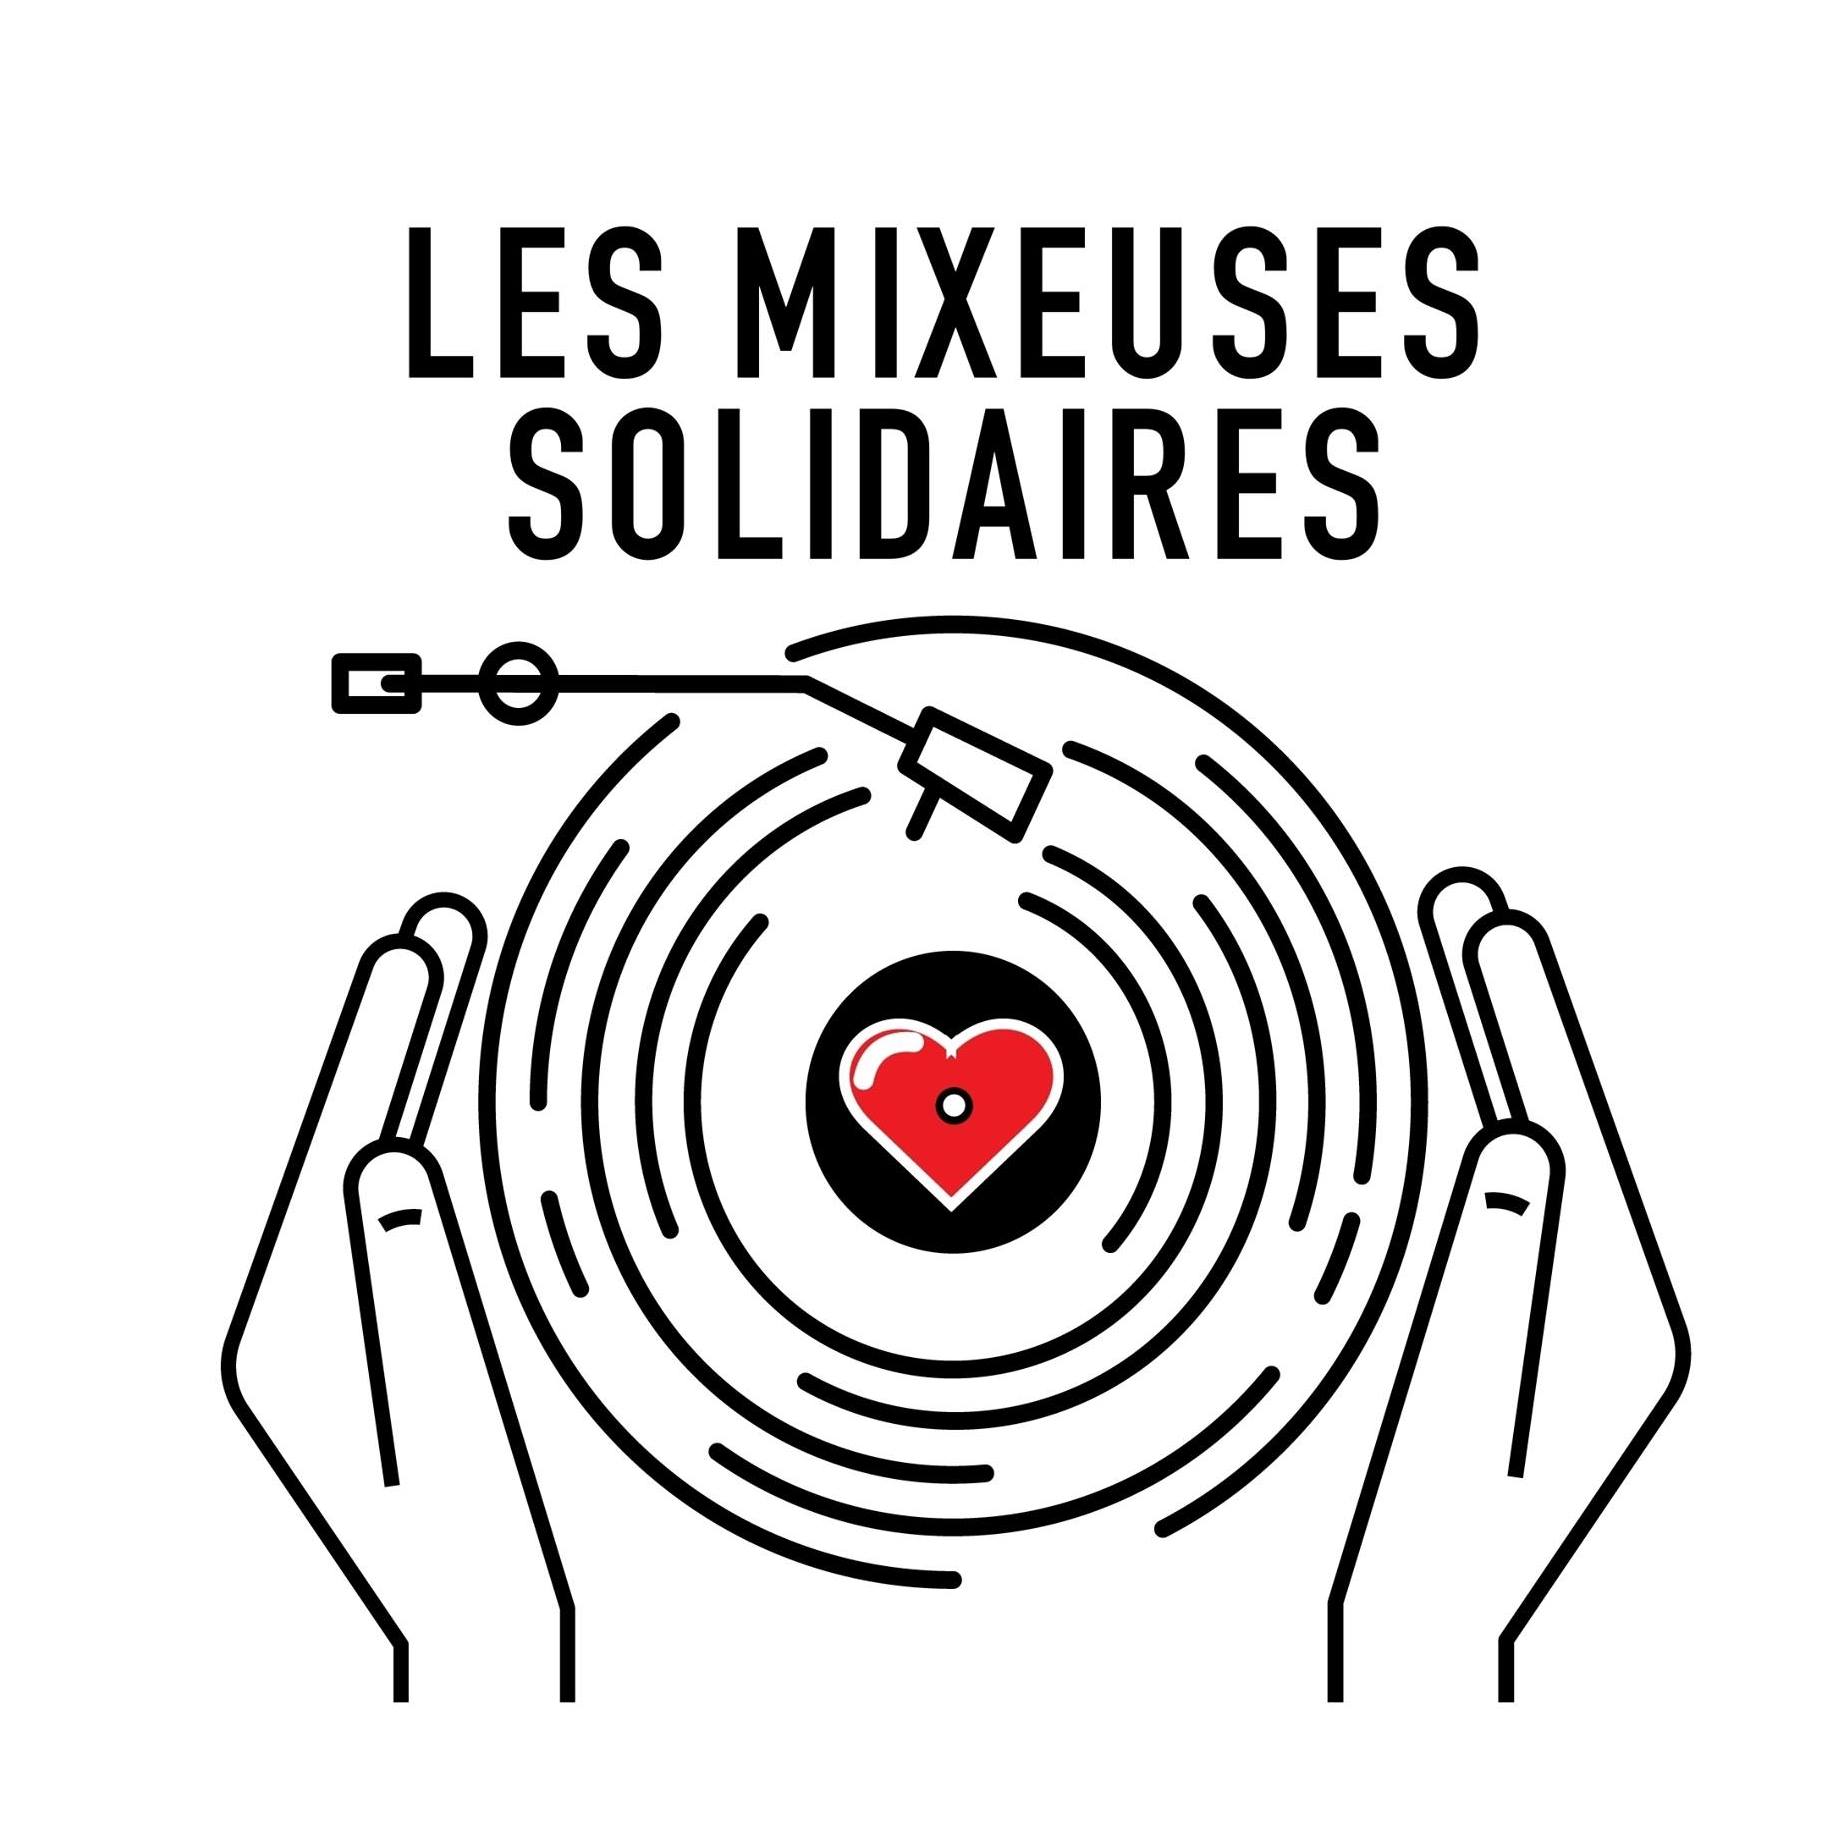 Les Mixeuses Solidaires